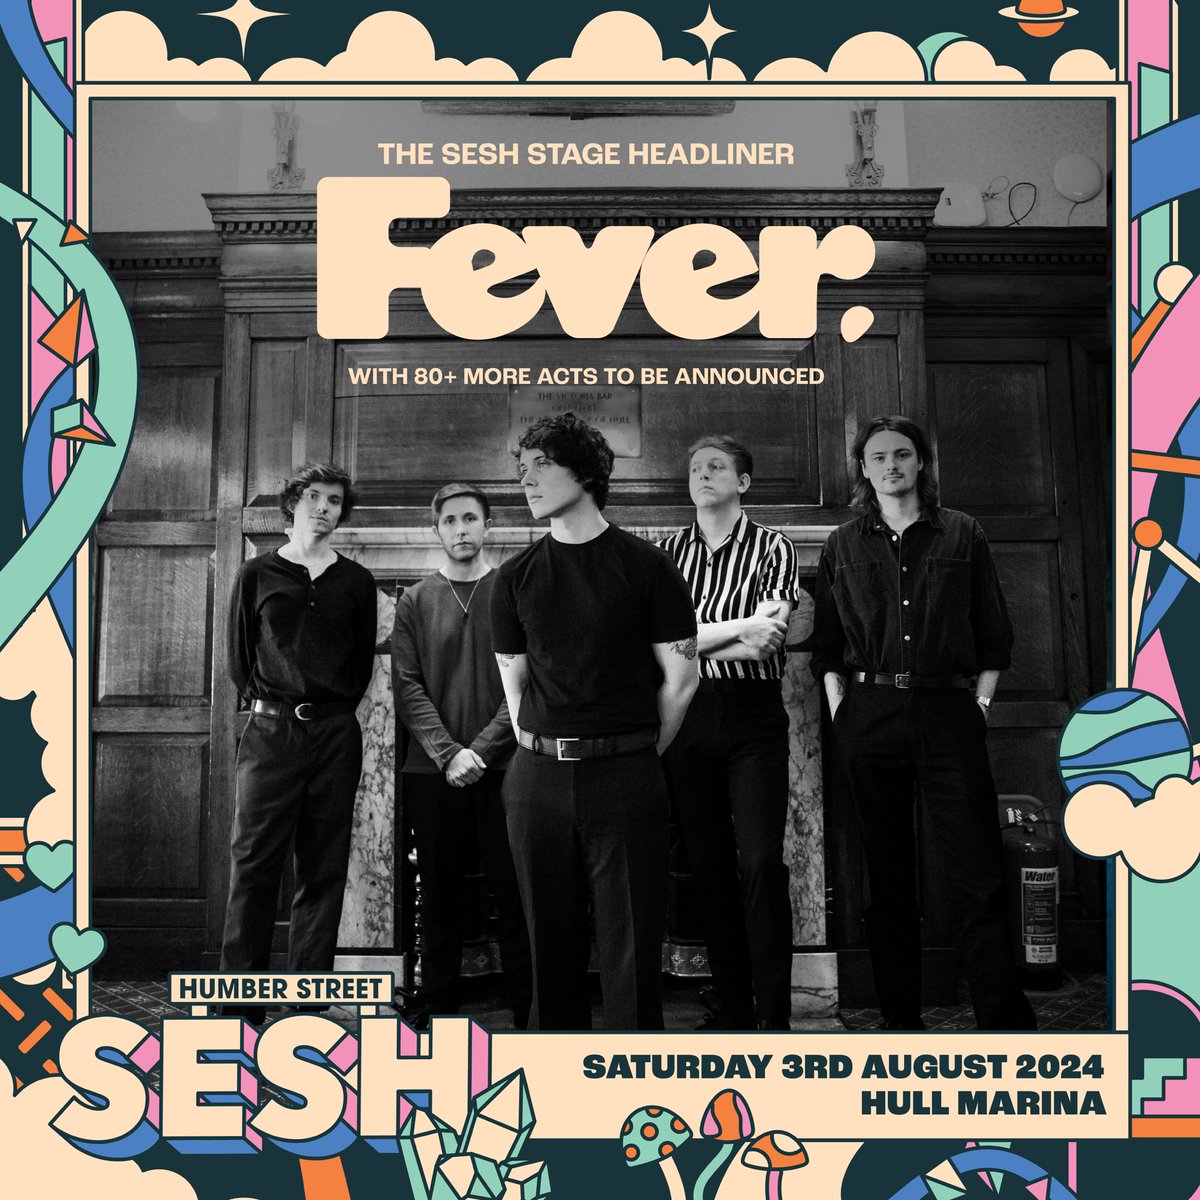 We’re very happy to say that we’ll be headlining ‘The Sesh’ stage at this year’s @HumberStSesh. Our headline set last year on the @bbcintroducing stage was a very special night for us and we can’t wait to do it all over again! 🧡 bit.ly/HSS2024 🎫